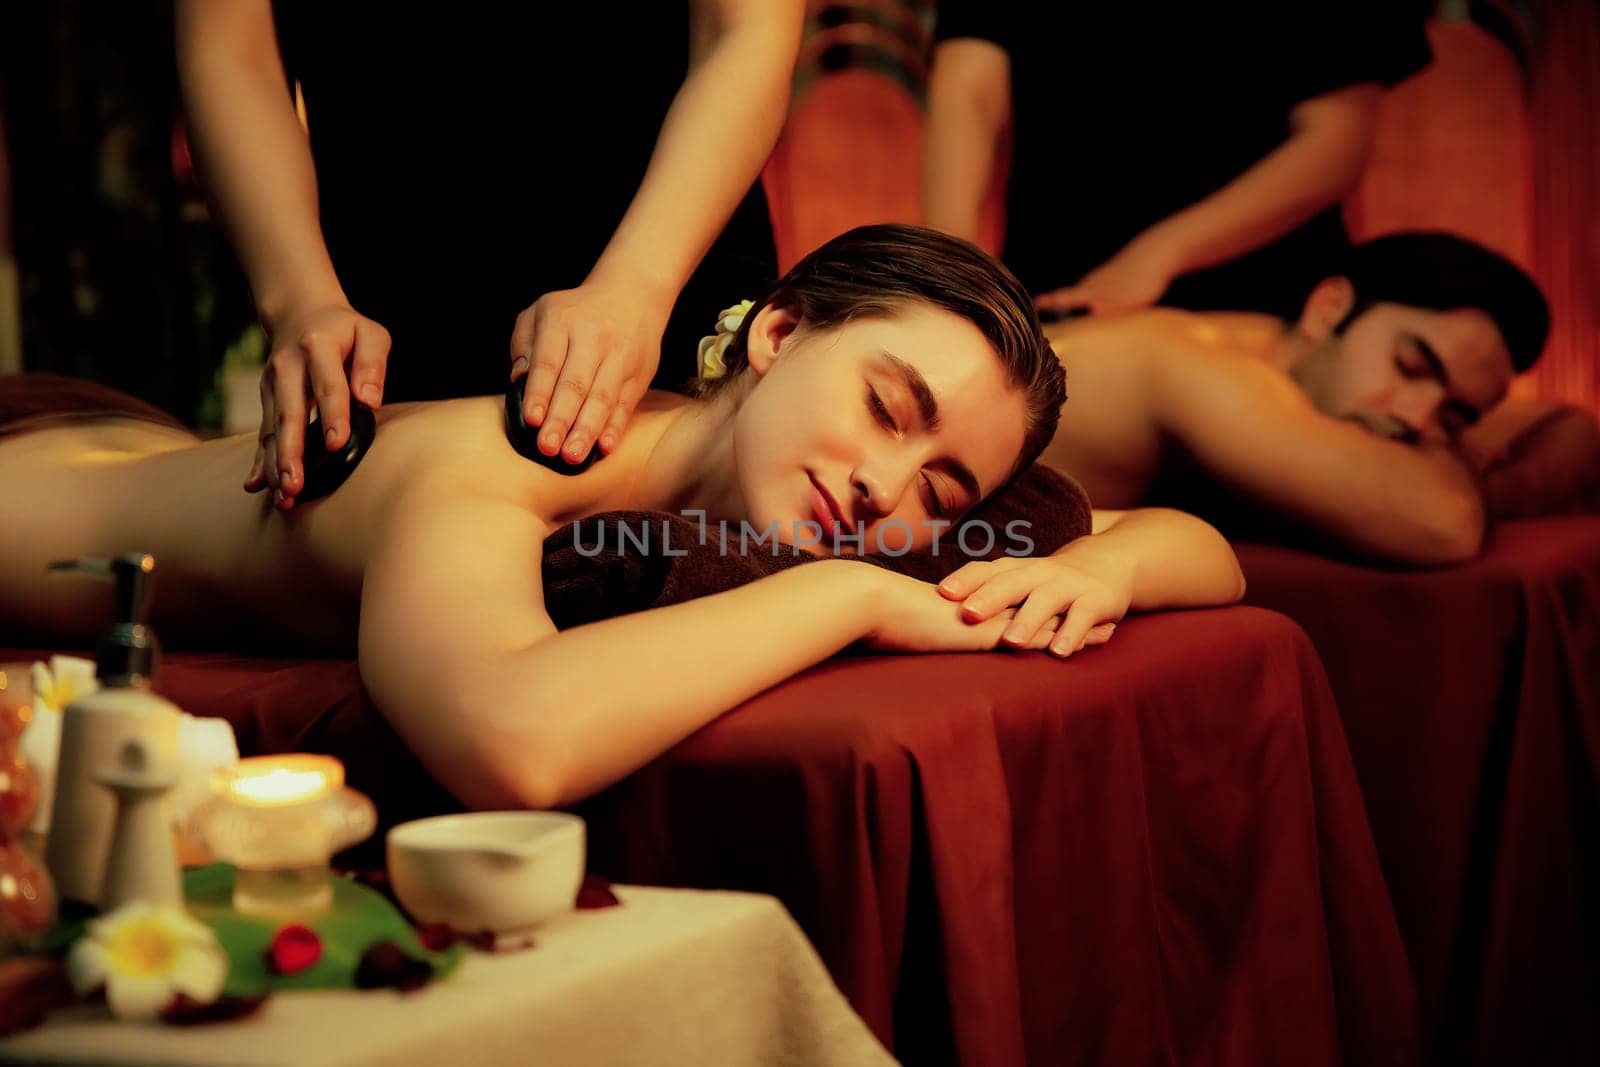 Hot stone massage at spa salon in luxury resort with warm candle light, blissful couple customer enjoying spa basalt stone massage glide over body with soothing warmth. Quiescent